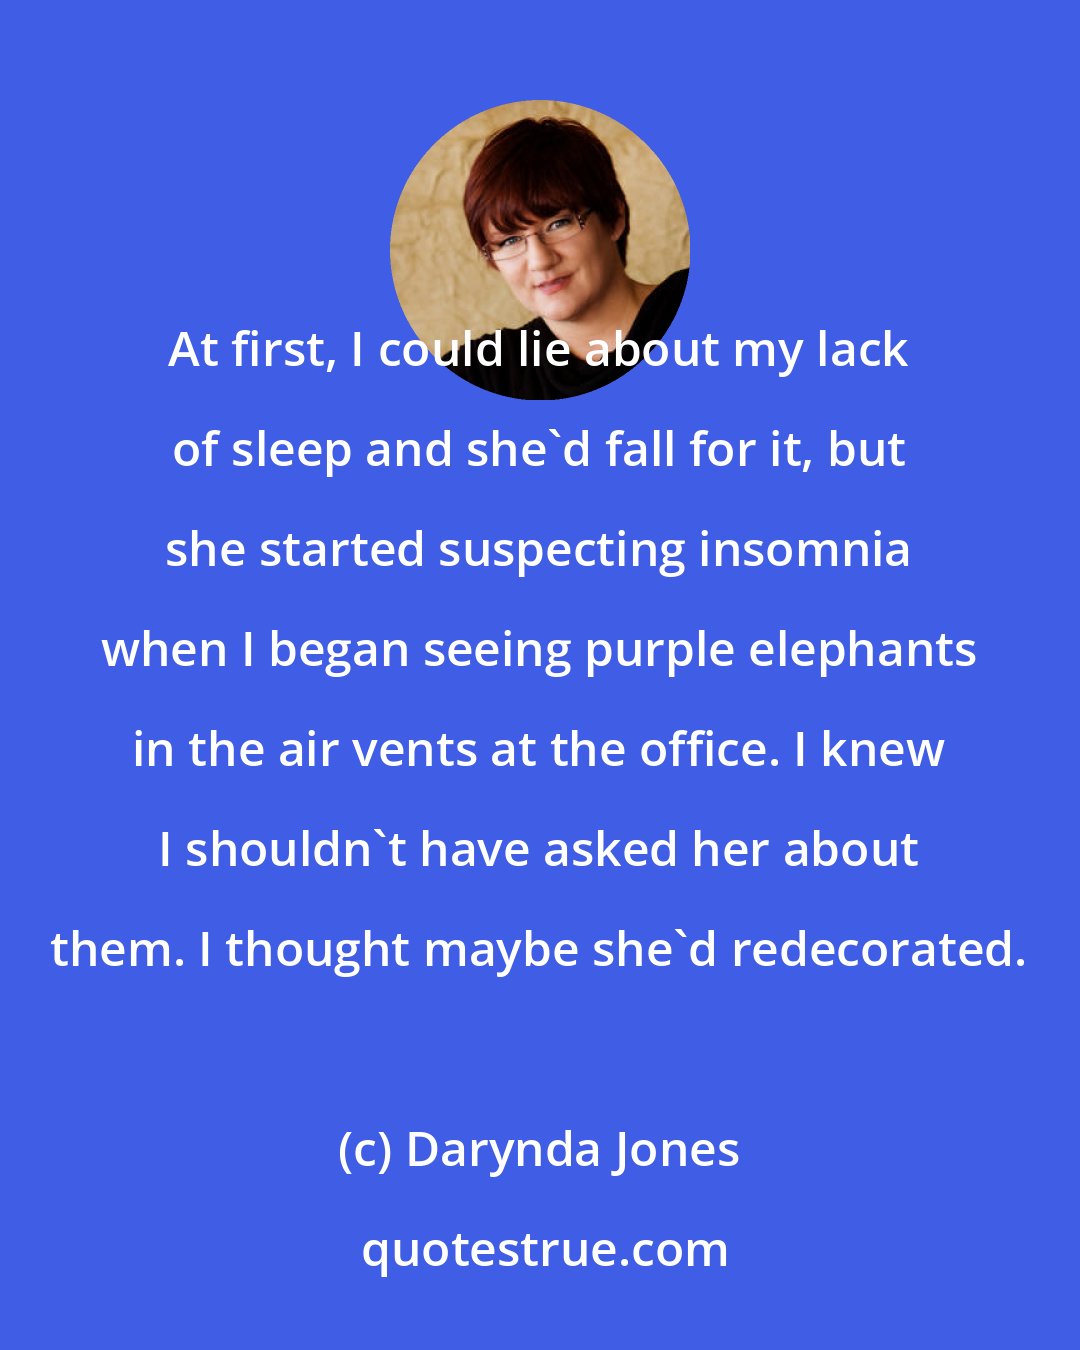 Darynda Jones: At first, I could lie about my lack of sleep and she'd fall for it, but she started suspecting insomnia when I began seeing purple elephants in the air vents at the office. I knew I shouldn't have asked her about them. I thought maybe she'd redecorated.